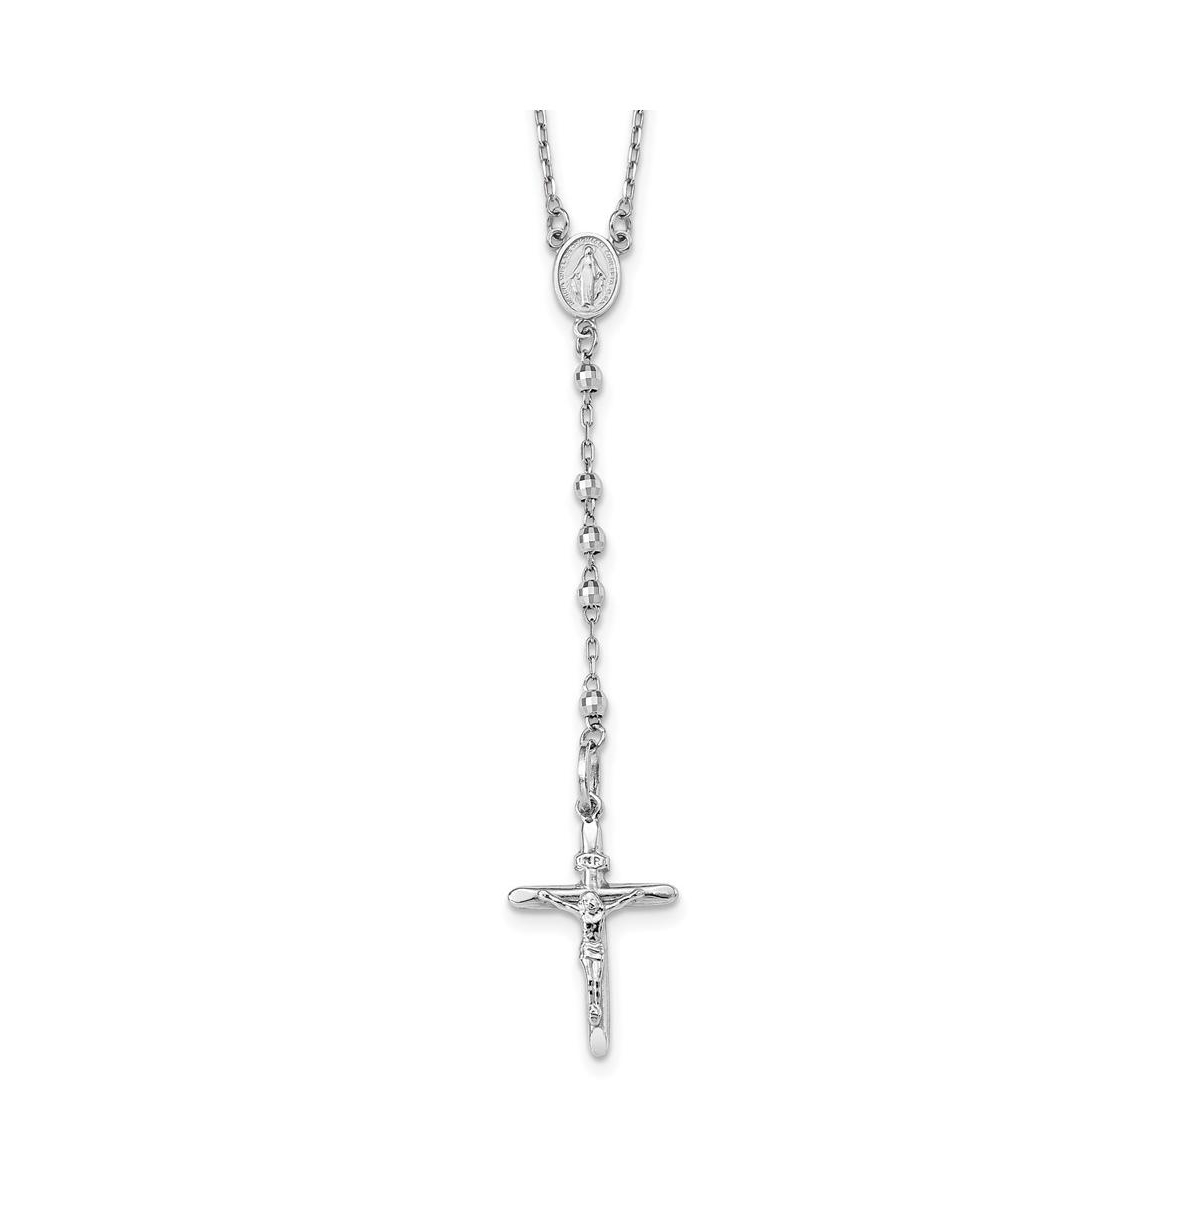 14k White Gold Diamond-cut Beaded Rosary Pendant Necklace 24" - Silver